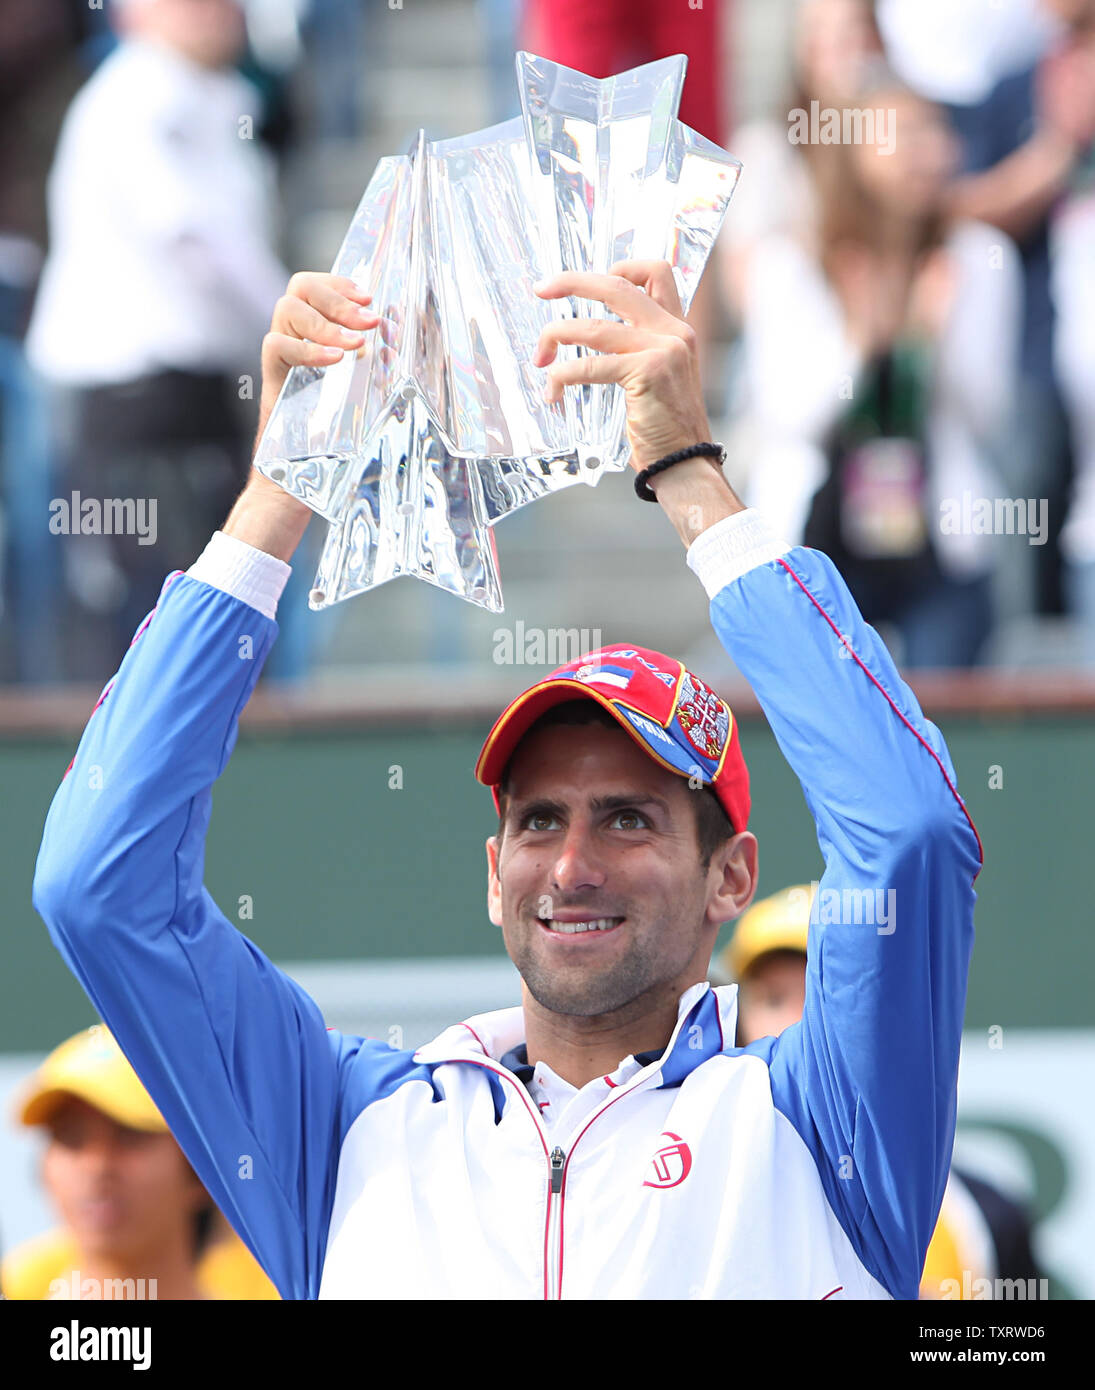 Serbian Novak Djokovic holds the championship trophy after winning his mens final match against Spaniard Rafael Nadal at the BNP Paribas Open in Indian Wells, California on March 20, 2011.  Djokovic defeated Nadal 4-6, 6-3, 6-2 to win the tournament.   UPI/David Silpa Stock Photo